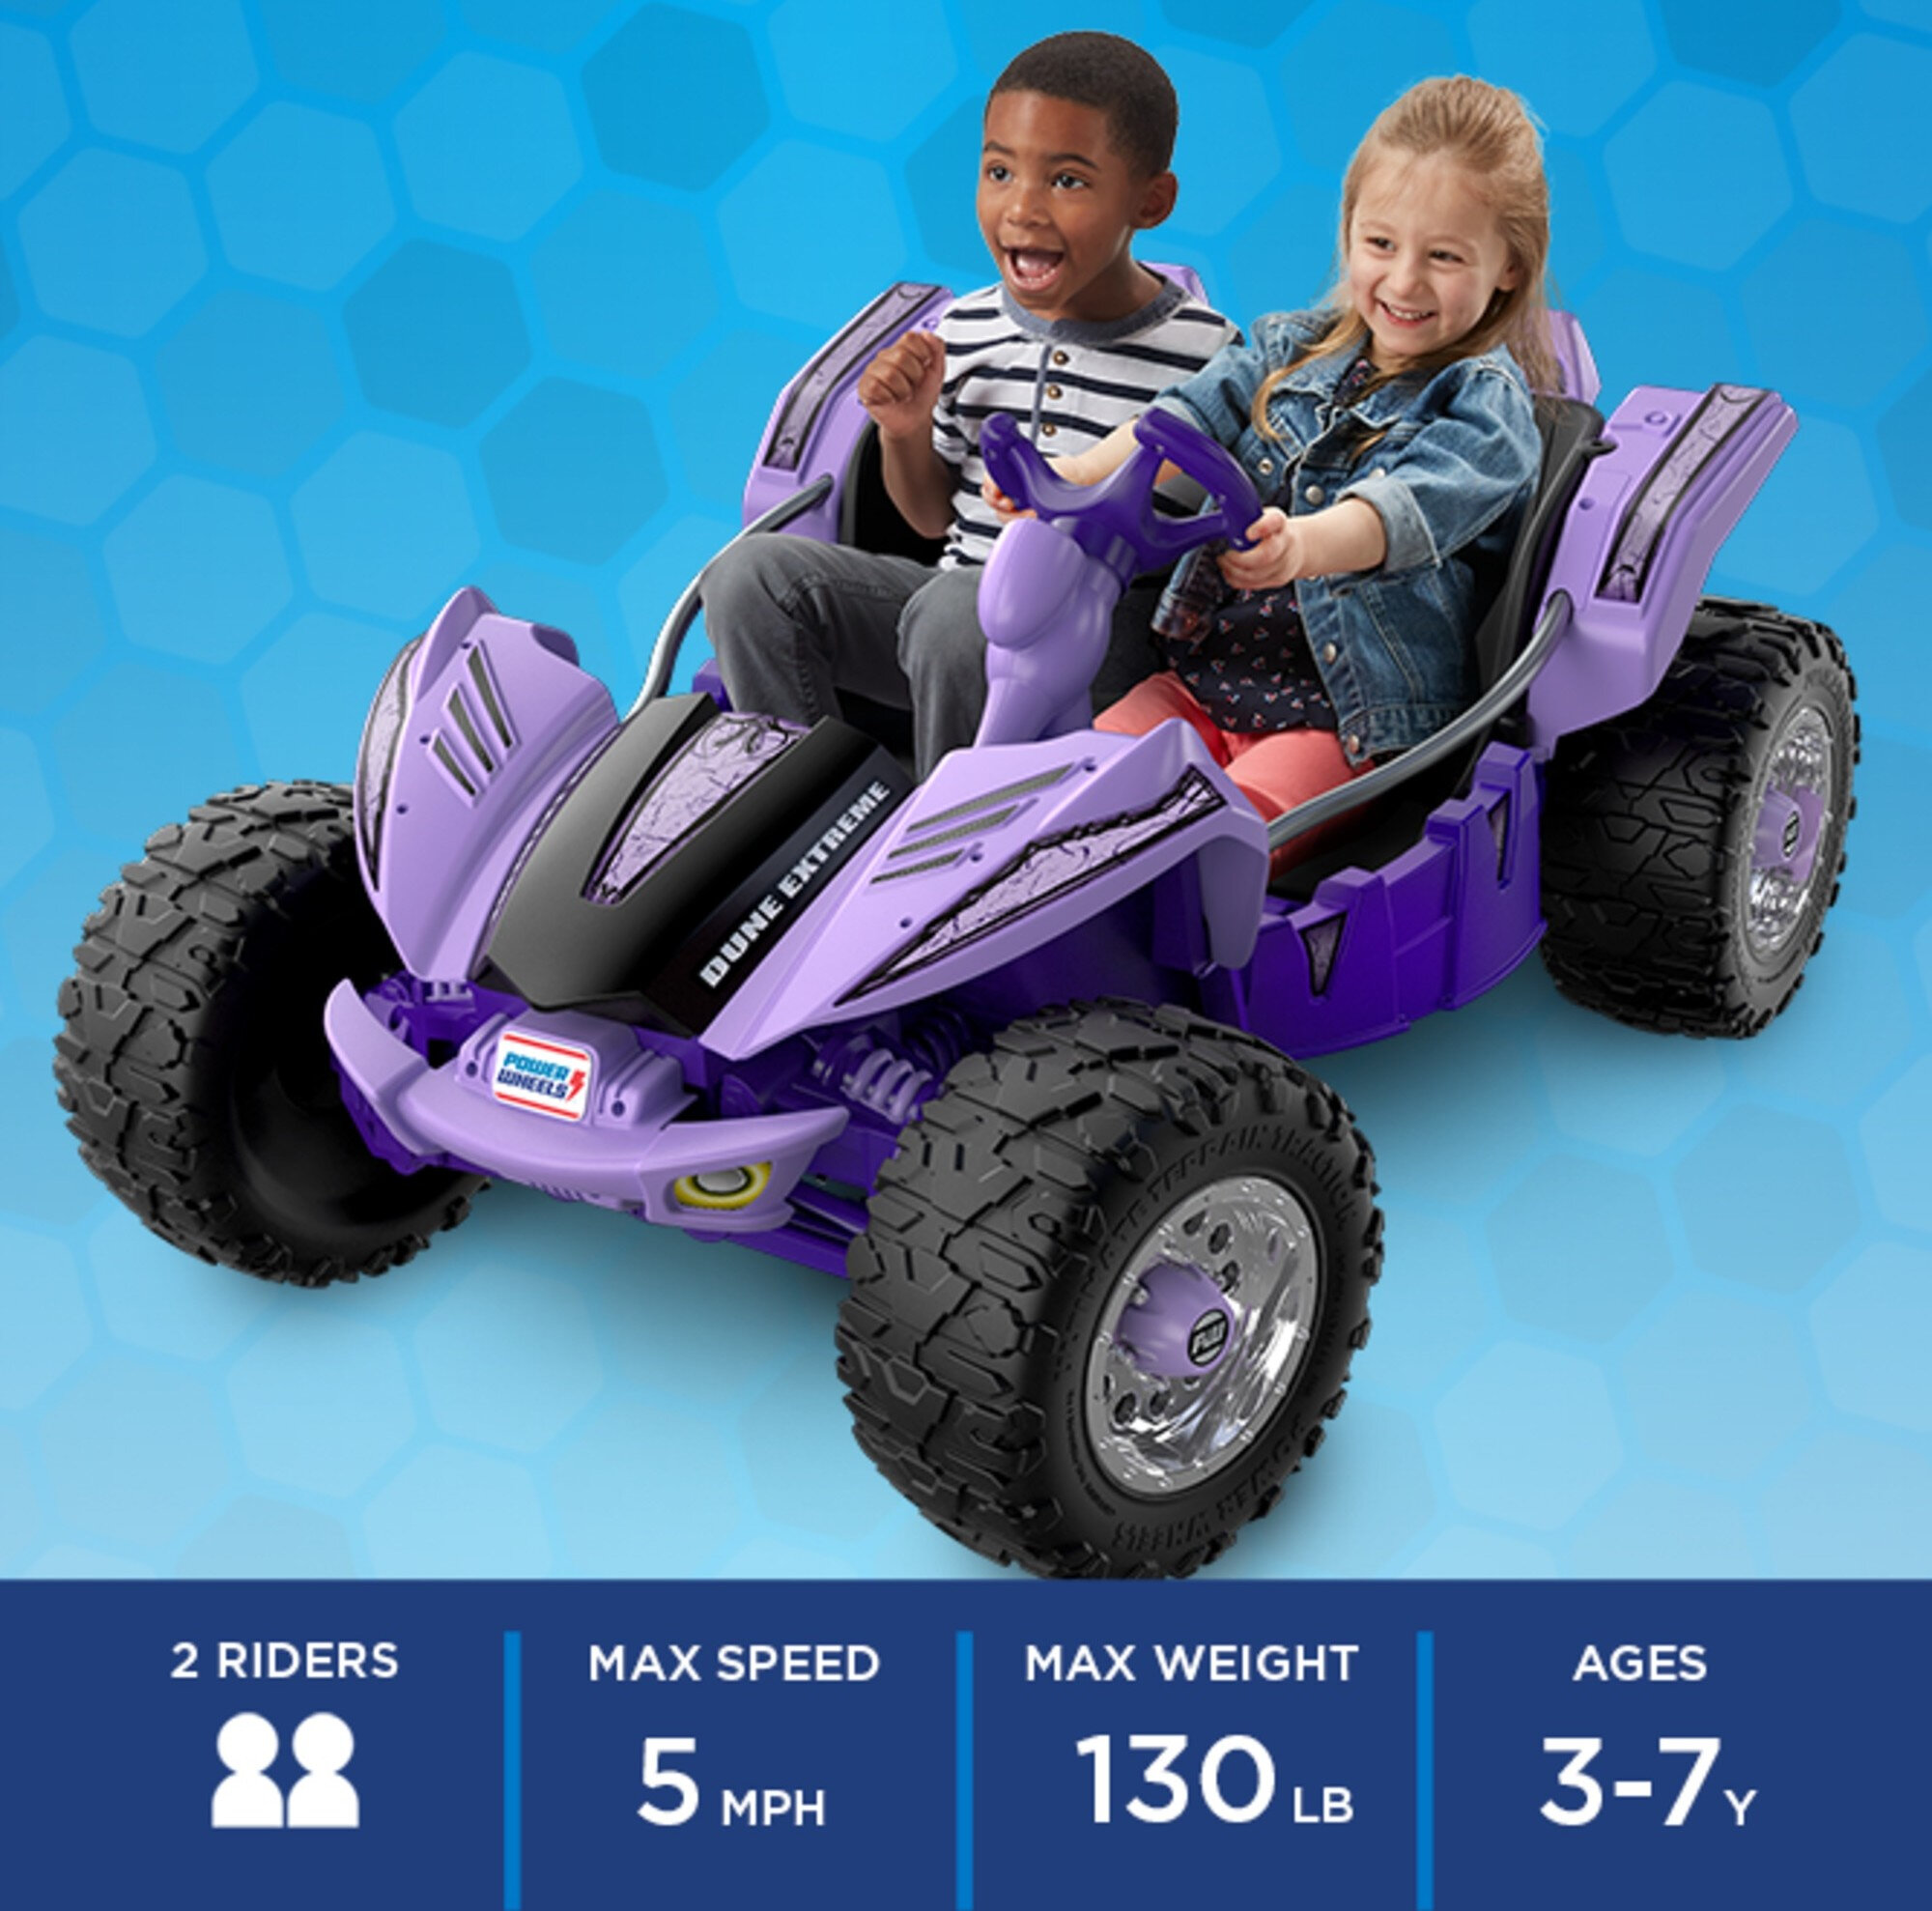 12V Power Wheels Dune Racer Extreme Battery-Powered Ride-on, Purple, for a Child Ages 3-7 - image 2 of 6